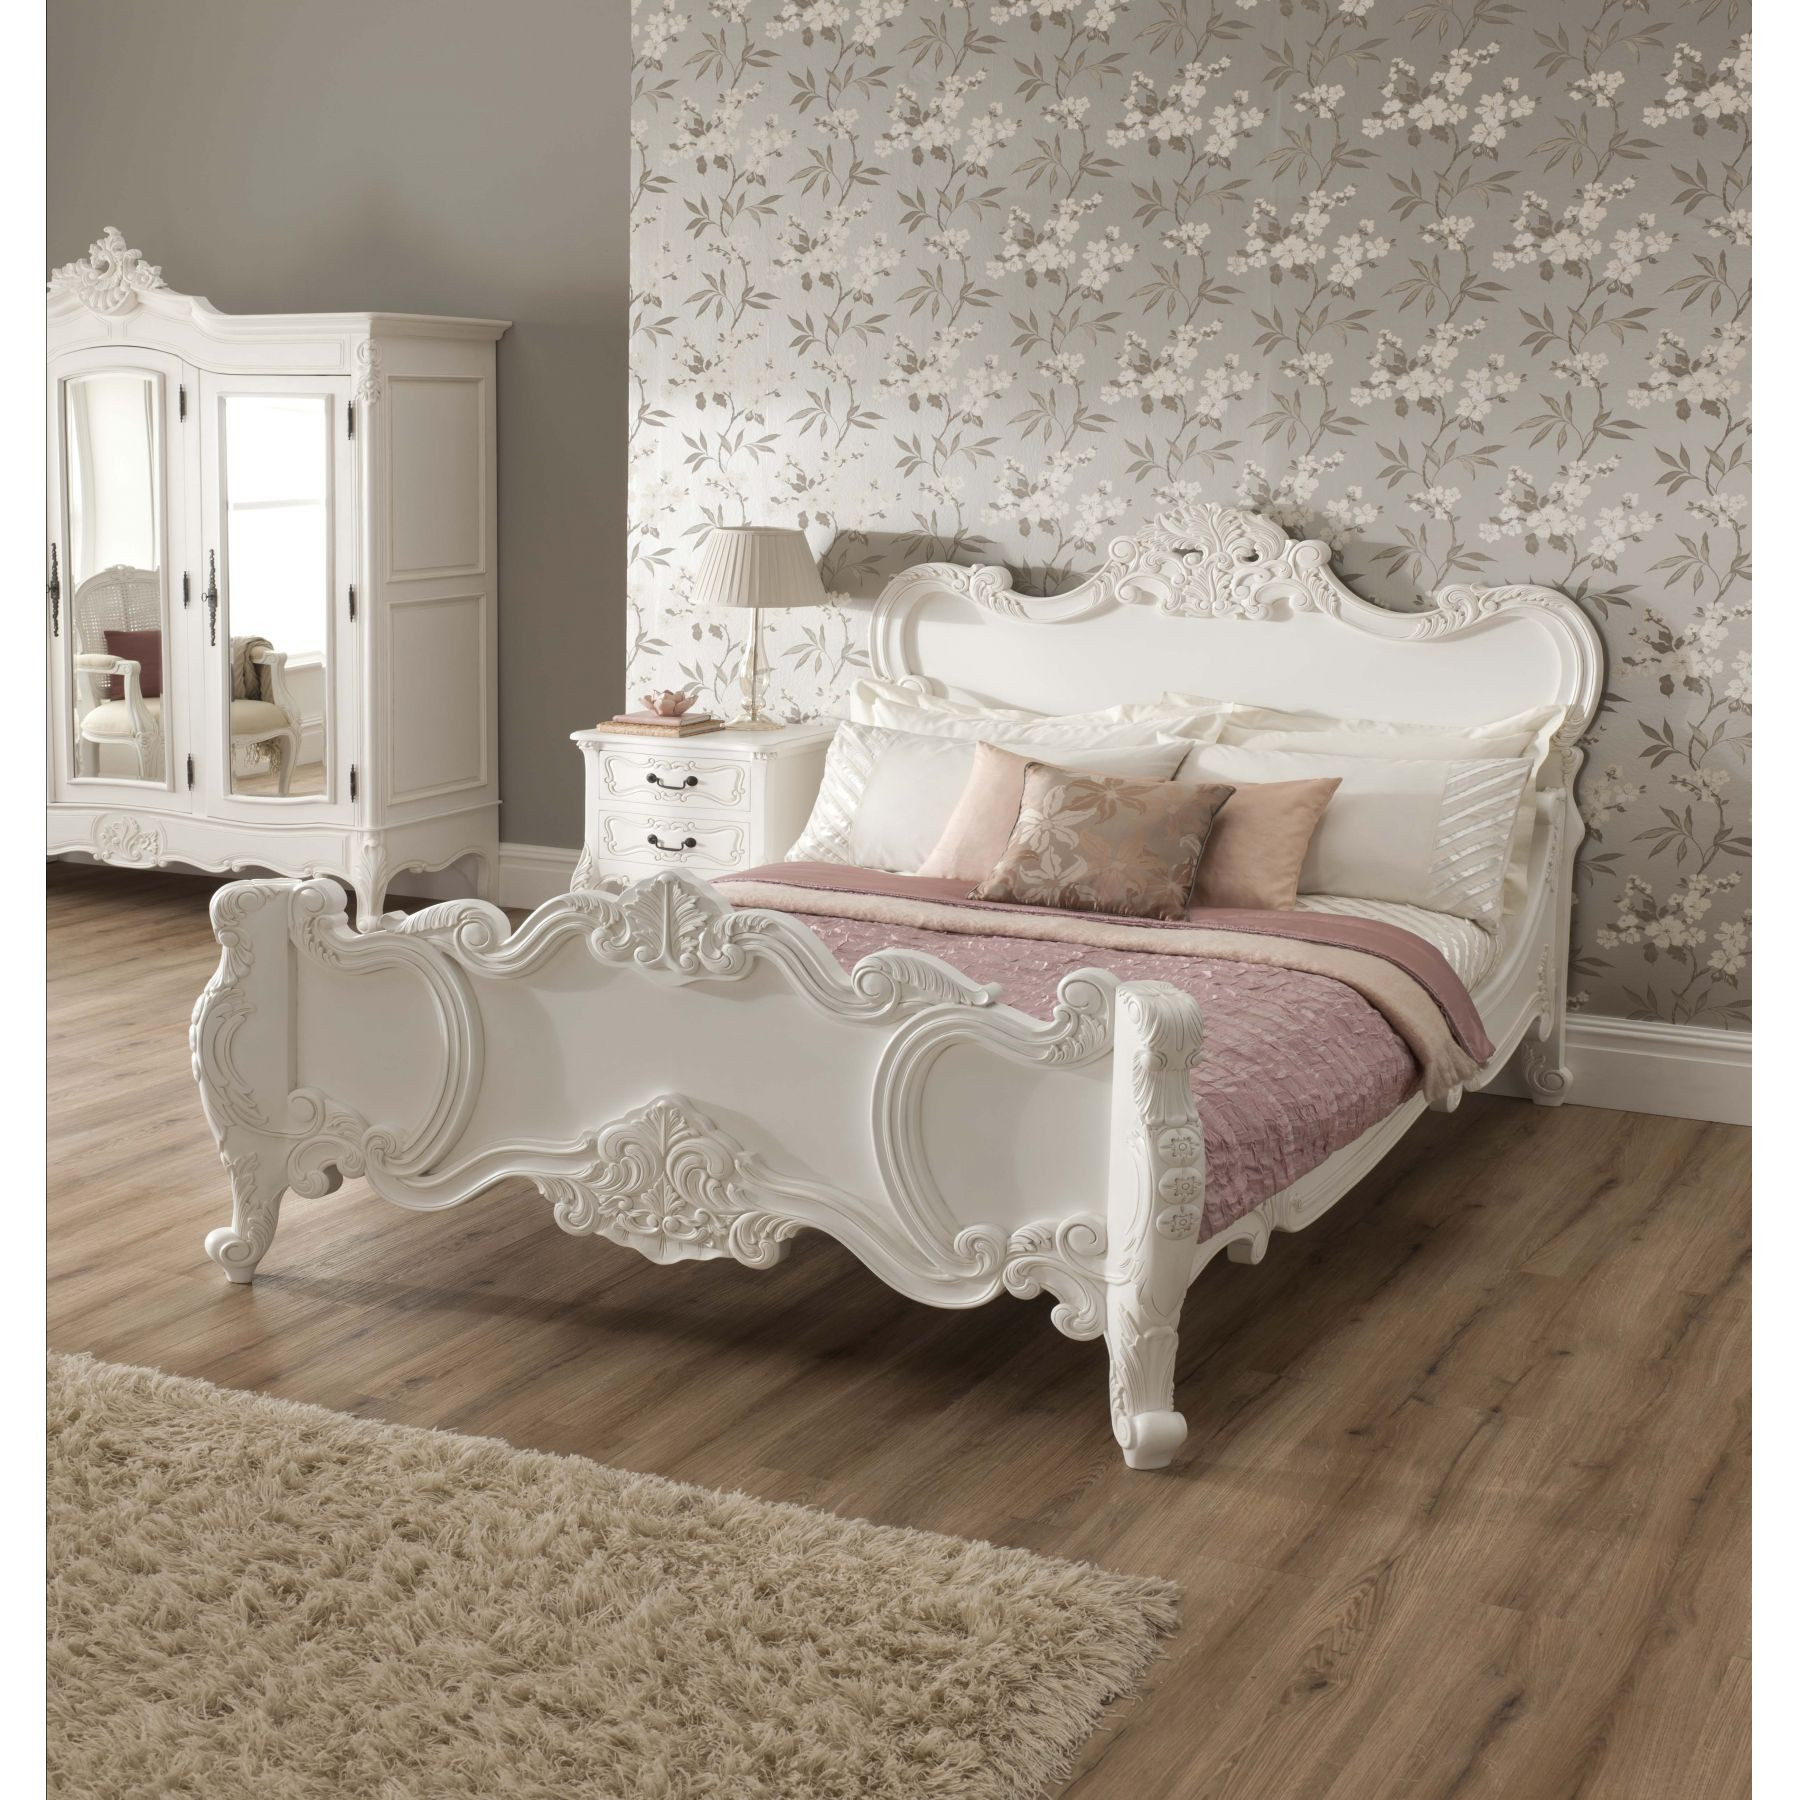 Shabby Chic Bedroom Set Luxury Vintage Your Room with 9 Shabby Chic Bedroom Furniture